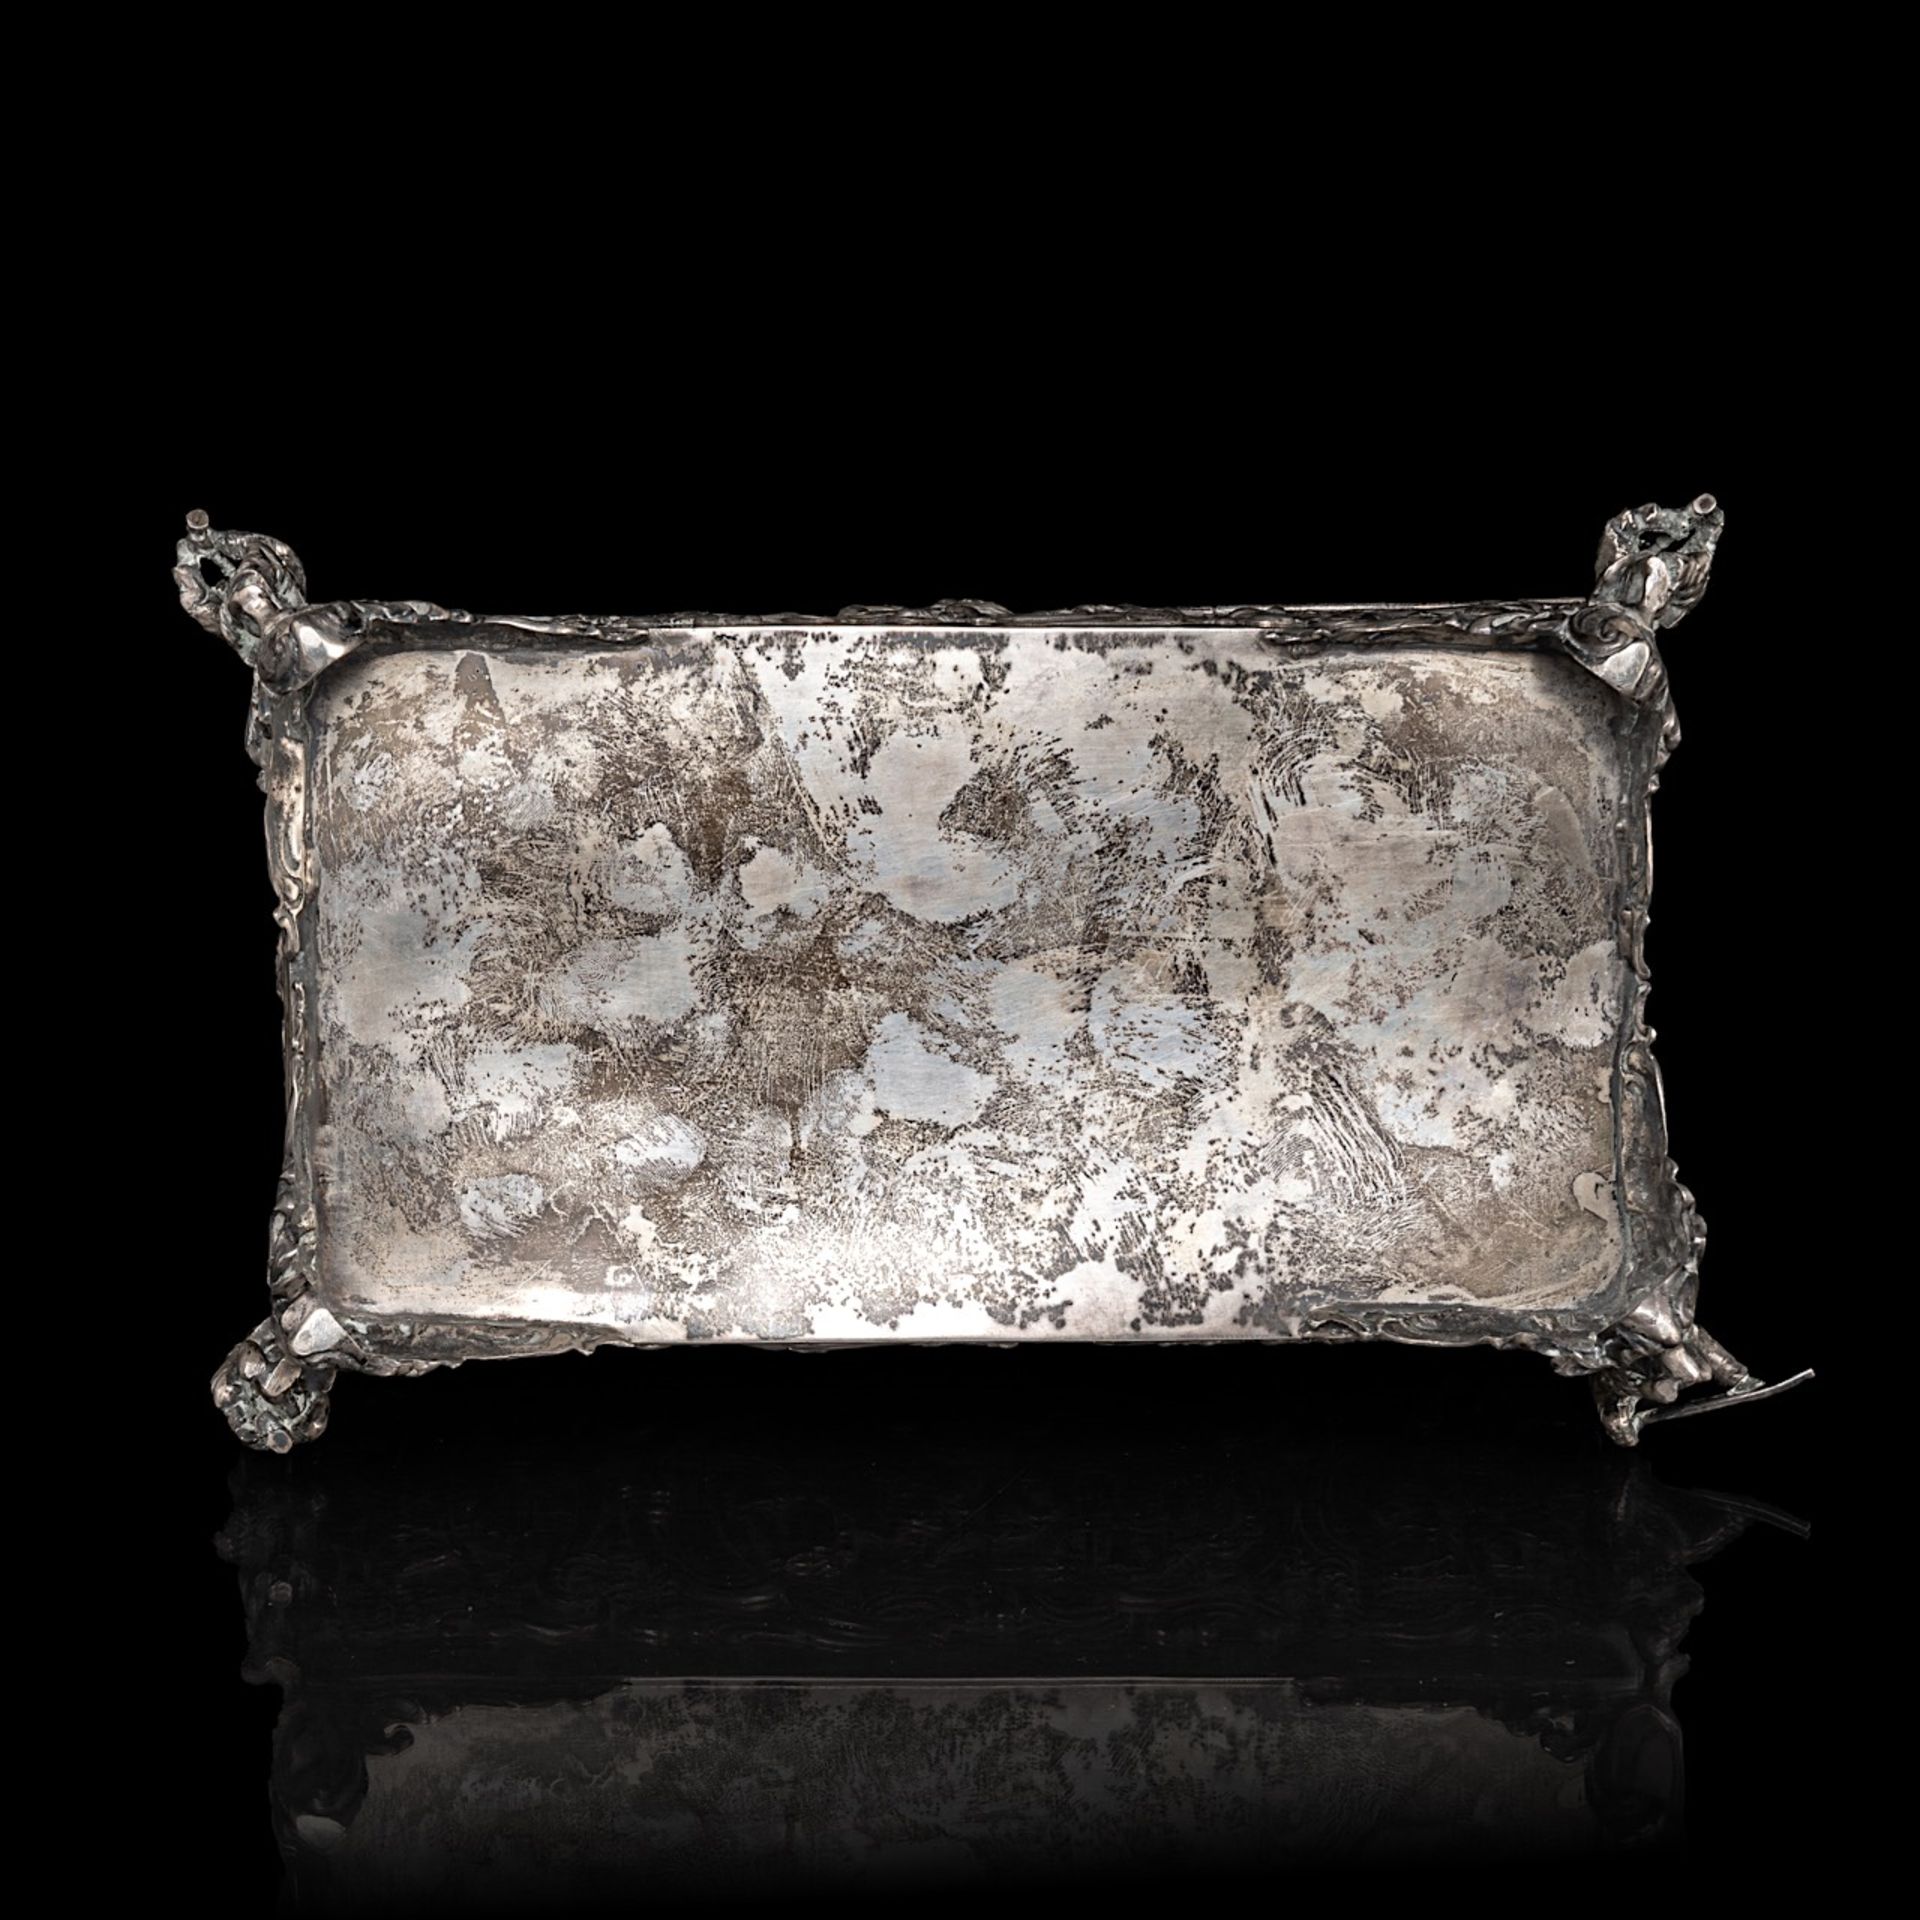 A Baroque Revival German silver jewellery casket, (1888-present), 800/000, weight ca: 1312 g 14.5 x - Image 7 of 9